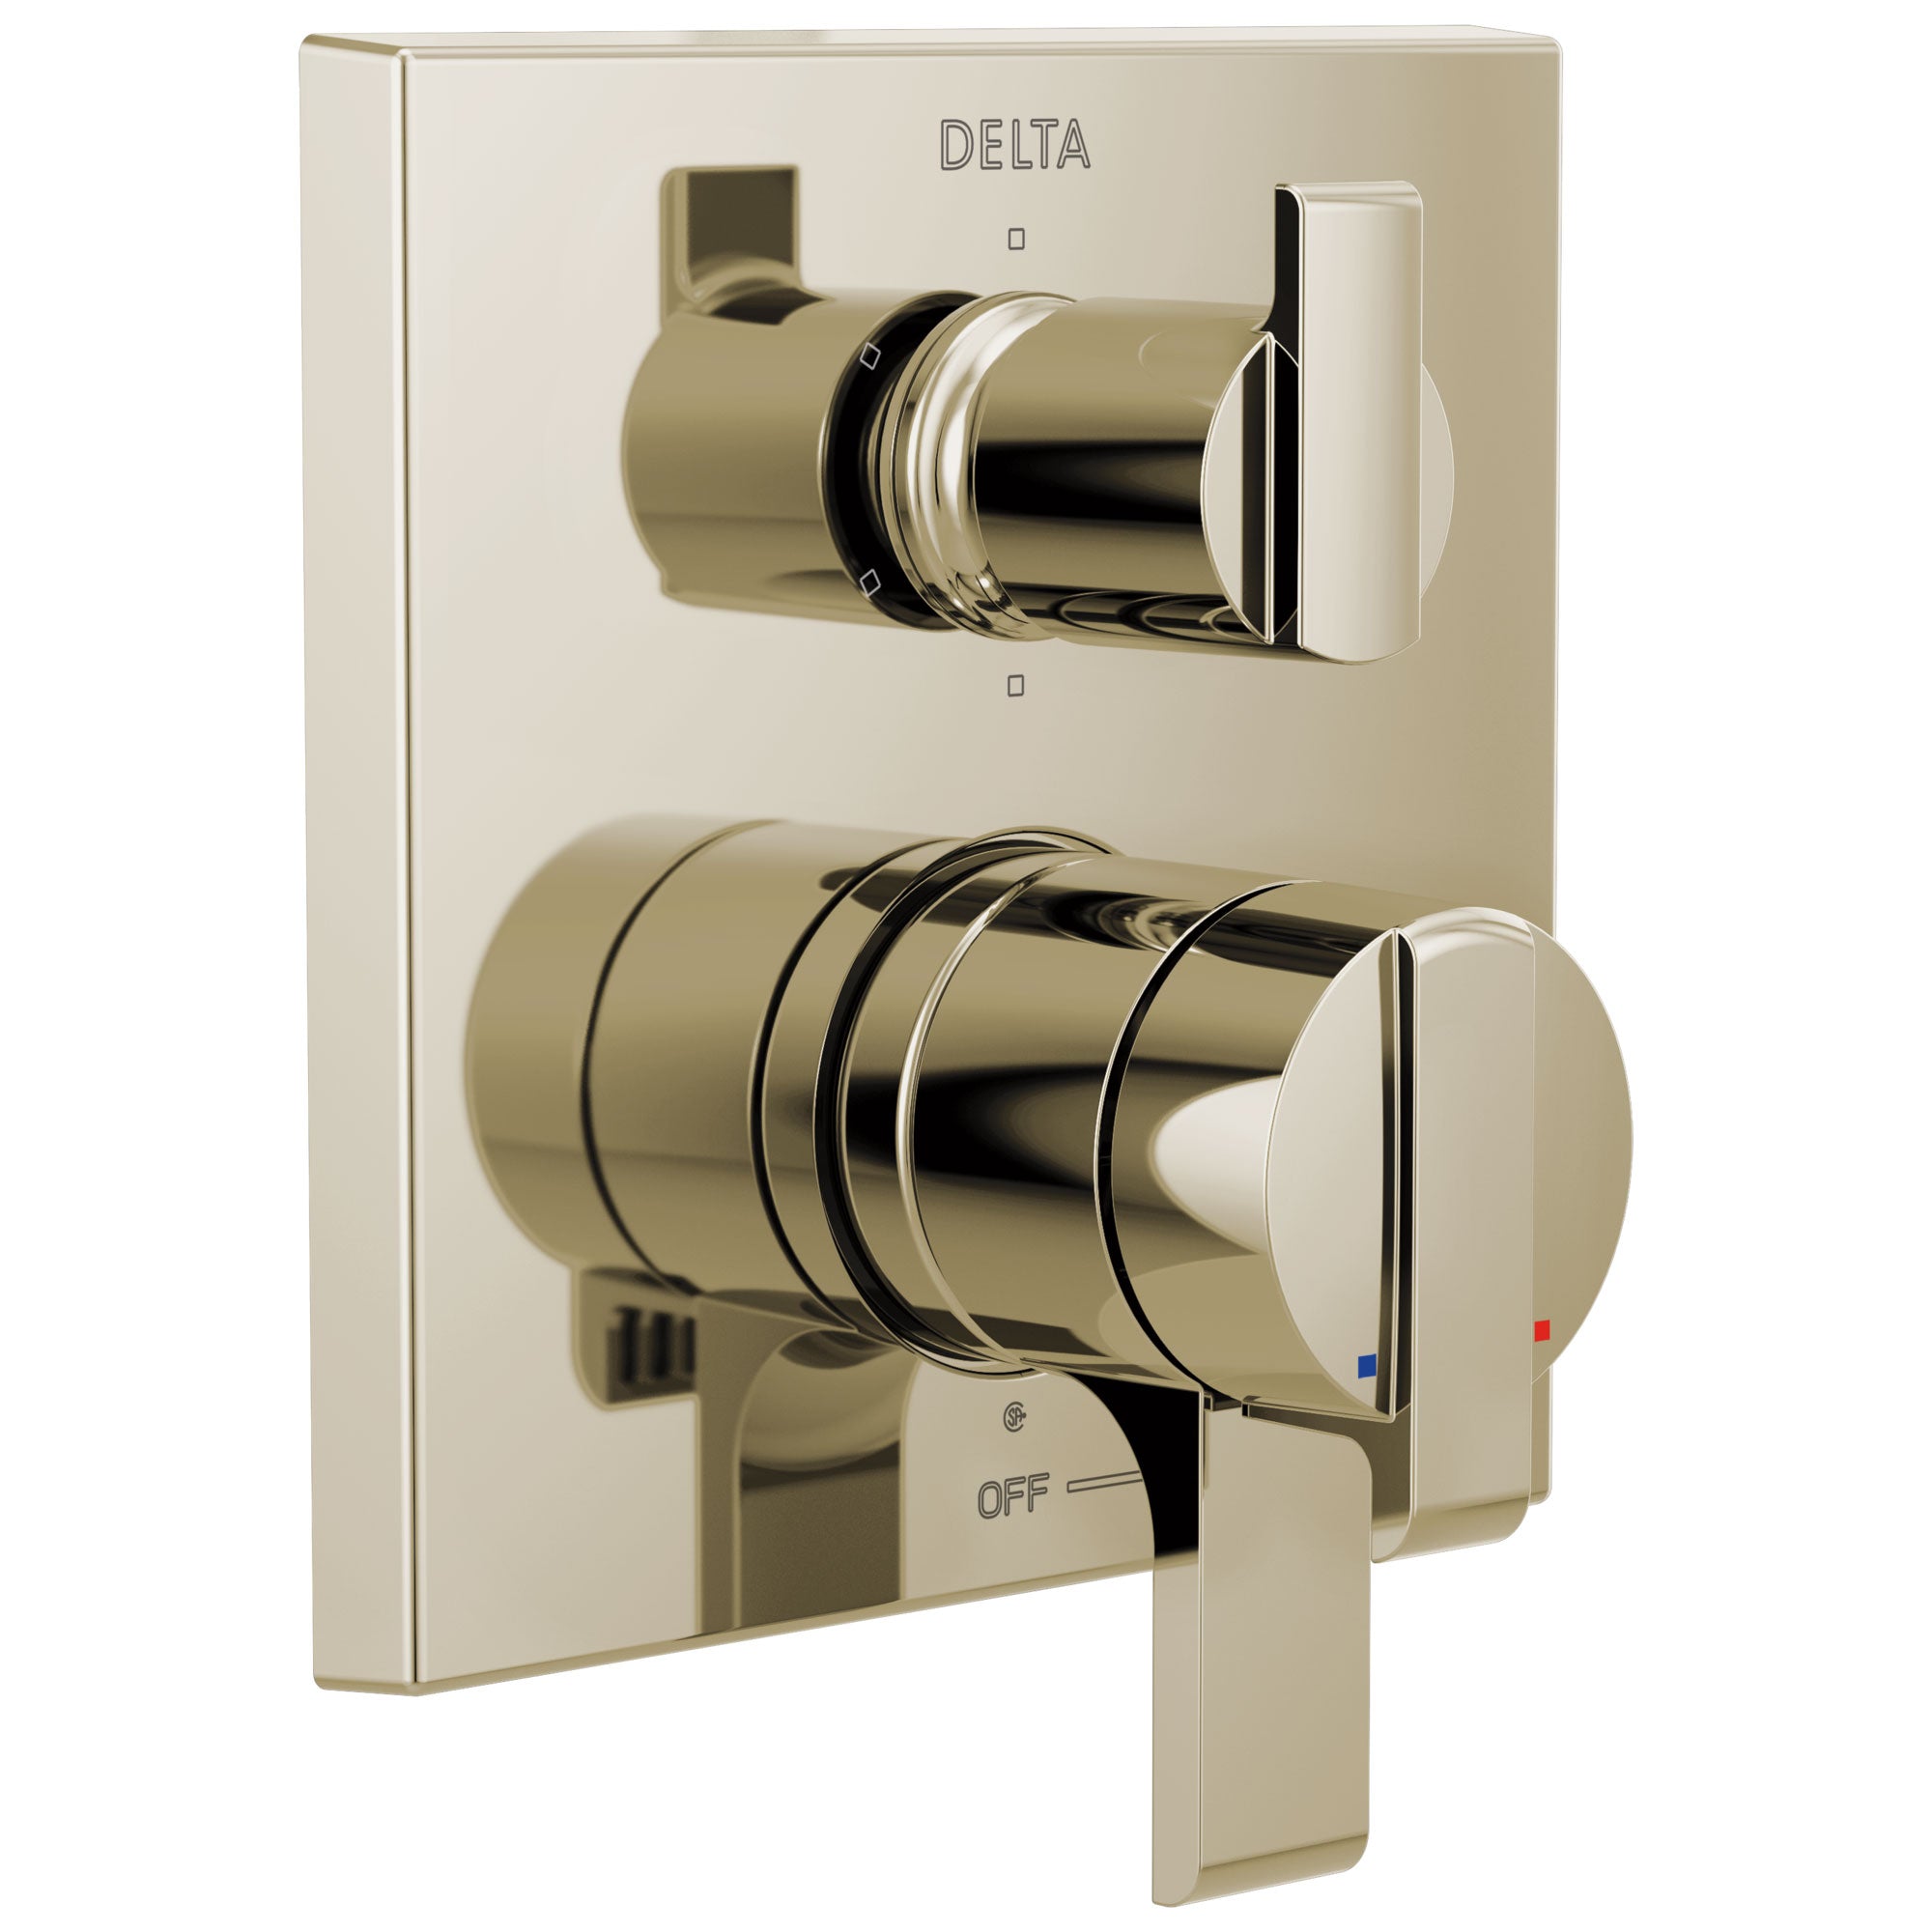 Delta Ara Polished Nickel Finish Angular Modern Monitor 17 Series Shower Control Trim Kit with 6-Setting Integrated Diverter (Requires Valve) DT27967PN